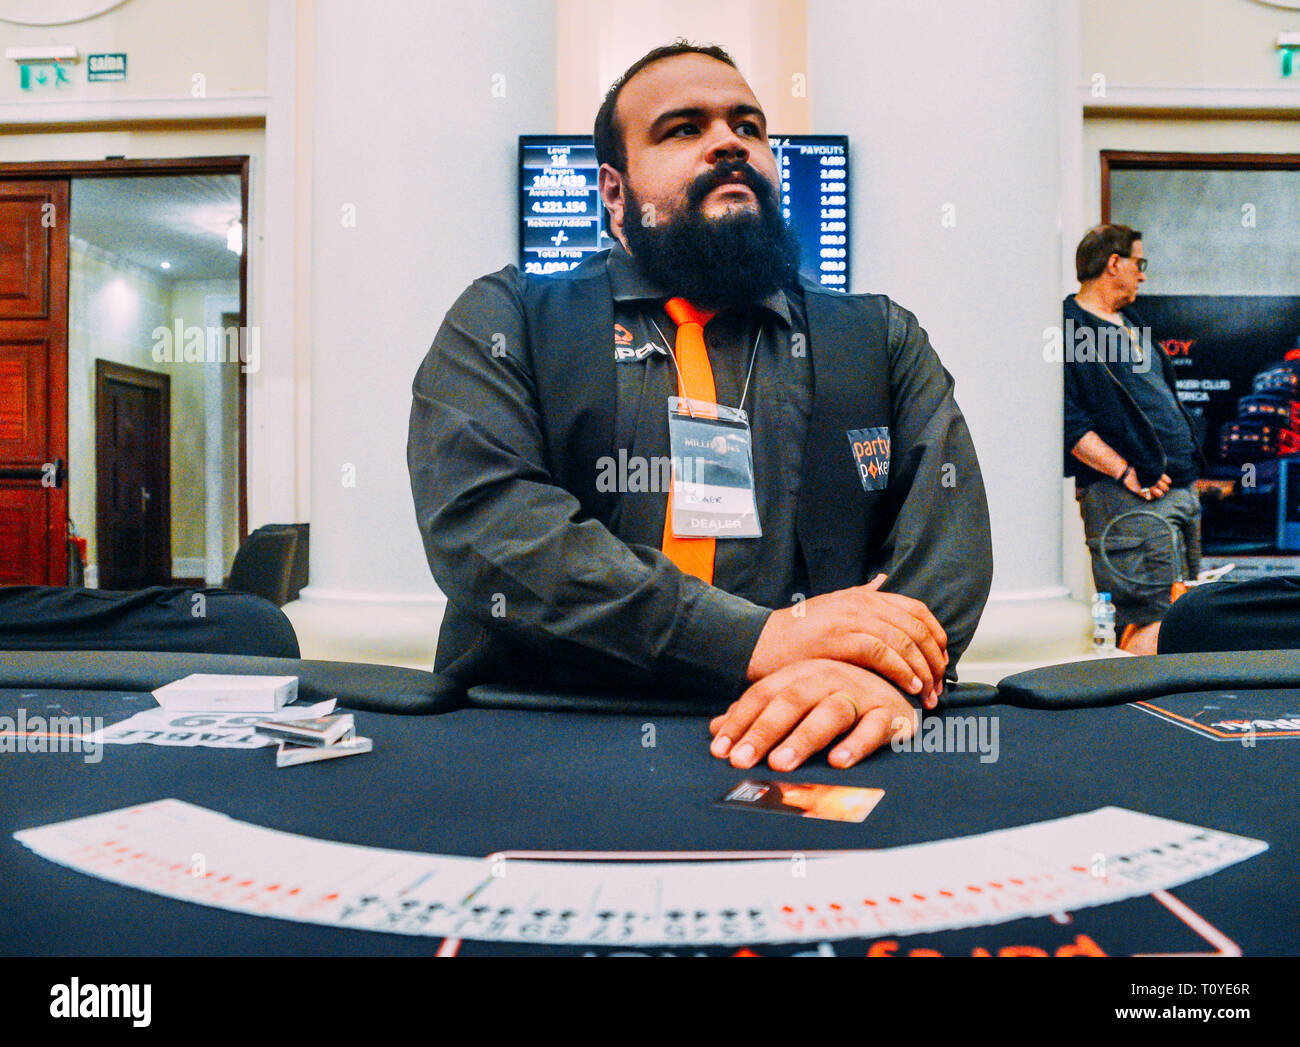 Rio de Janeiro, Brazil - March 21st, 2019: Close up of poker dealer at the the Main Event of the PartyPoker LIVE MILLIONS South America 2019 occuring at the luxurious Copacabana Palace Belmond Hotel in Rio de Janeiro, Brazil from March 15th through March 24th, 2019. Credit: Alexandre Rotenberg/Alamy Live News Stock Photo